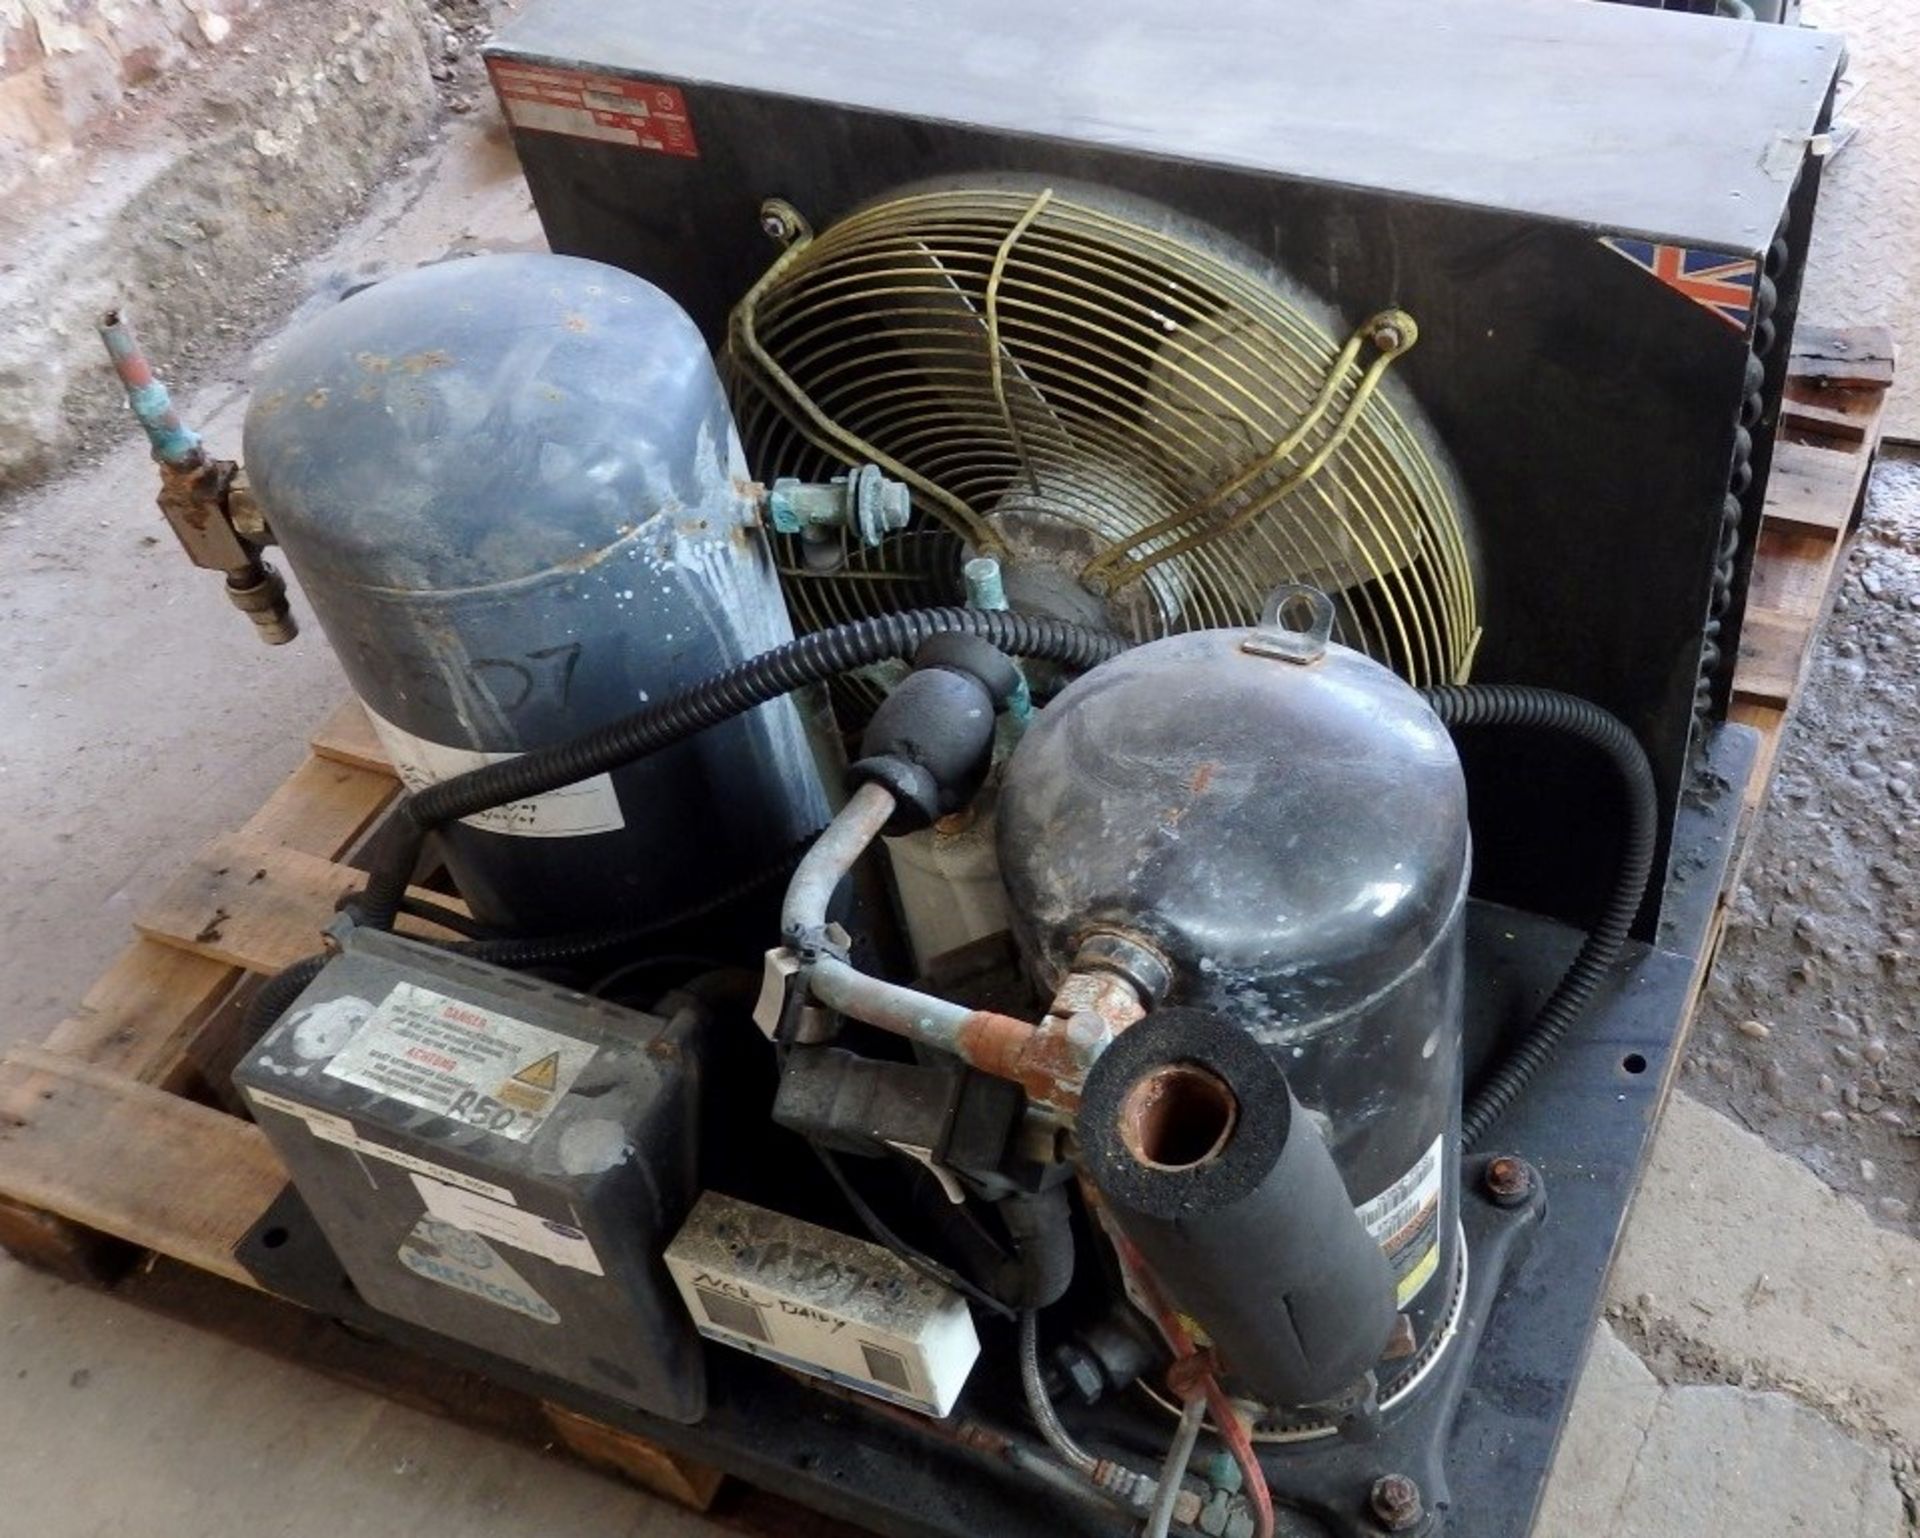 1 x Prestcold / Copeland Refrigeration Unit - Features Scroll Compressor & Fan - Used, Sold As - Image 7 of 8